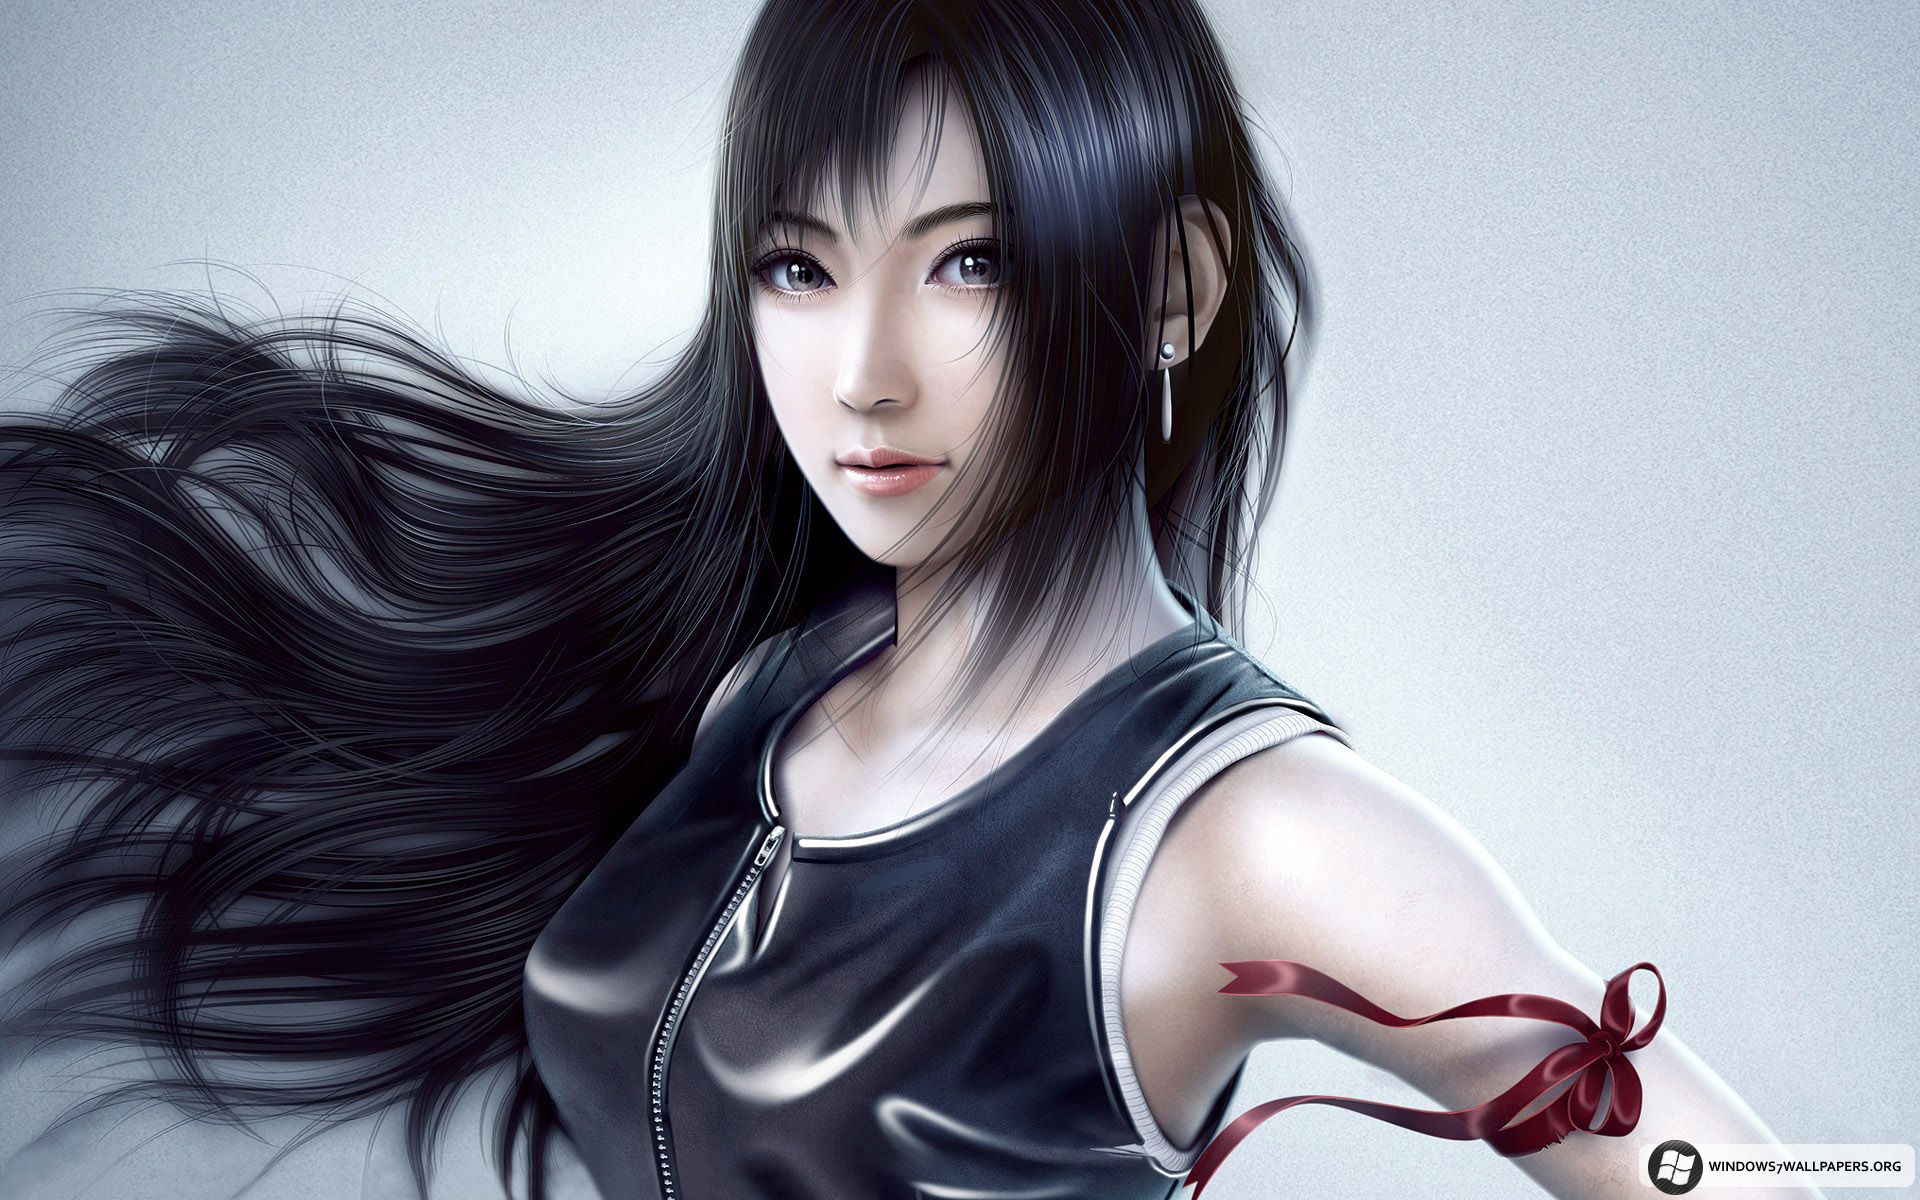 Cool Attitude Girls Wallpapers For Facebook Wallpapers - Final Fantasy Tifa Lockheart , HD Wallpaper & Backgrounds